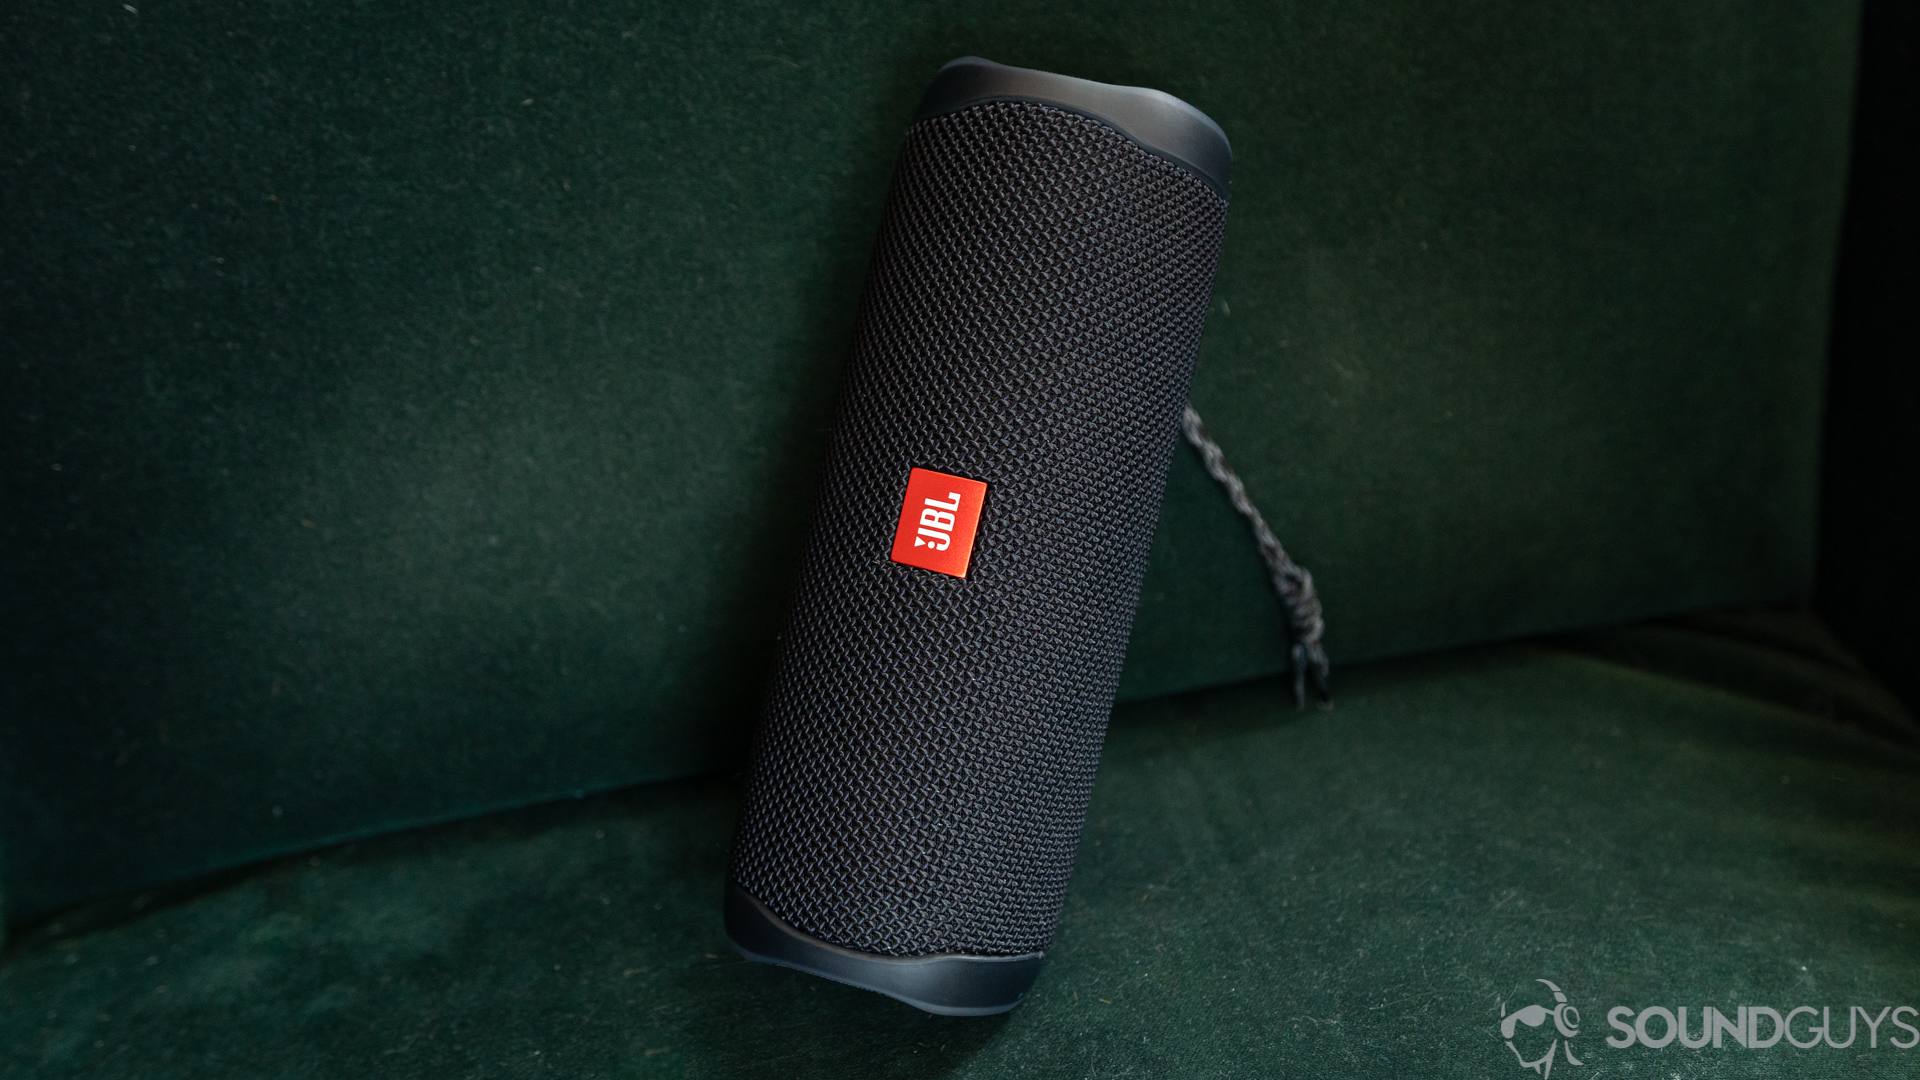 JBL FLip 5 on a green couch with logo visible